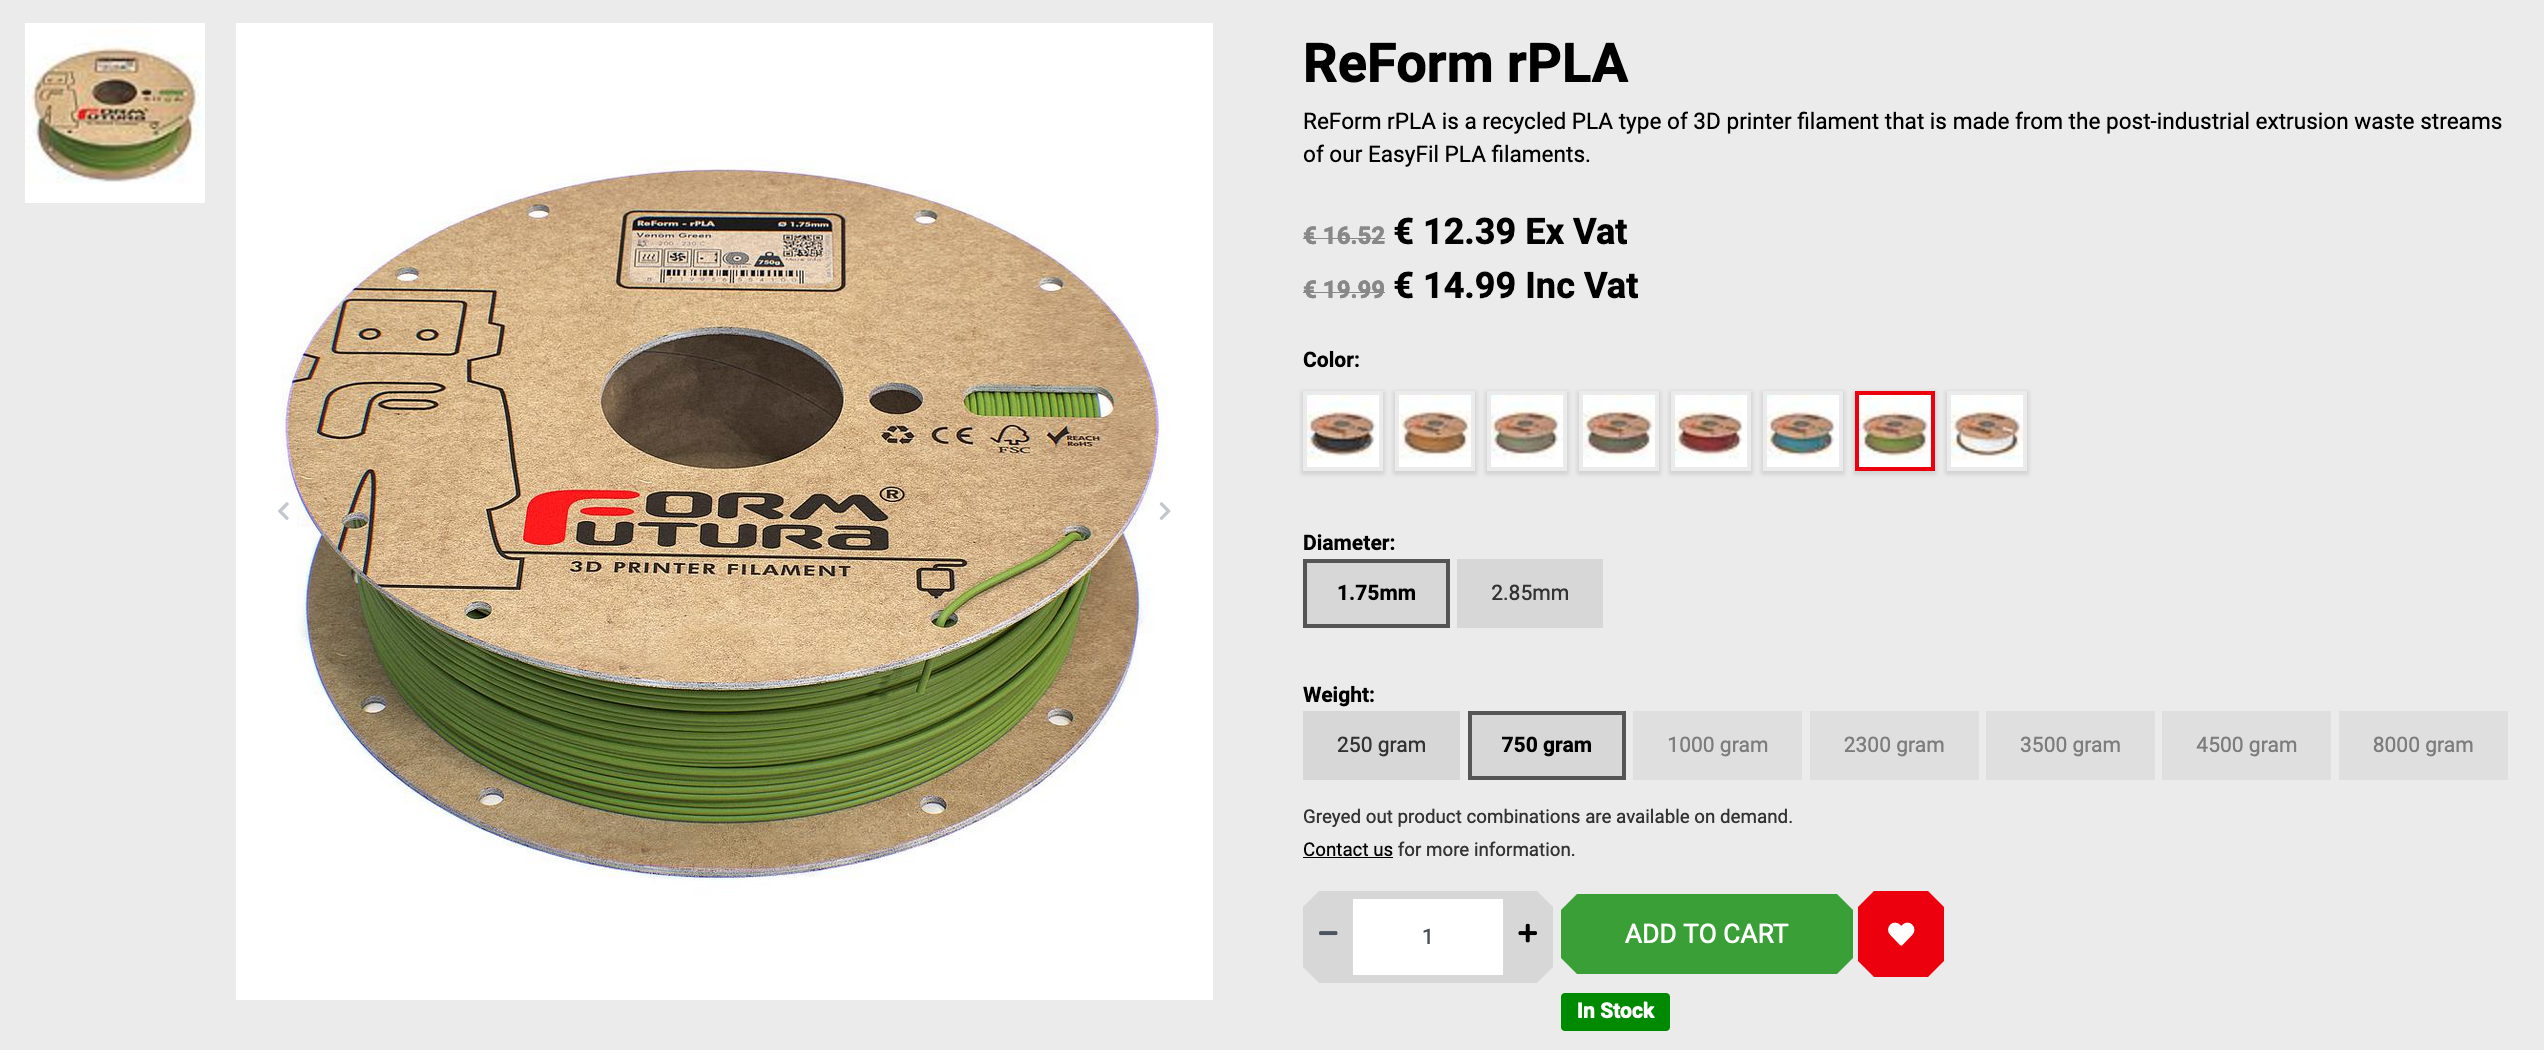 A online shop listing showing a spool of 3D printing filament by the company FormFutura